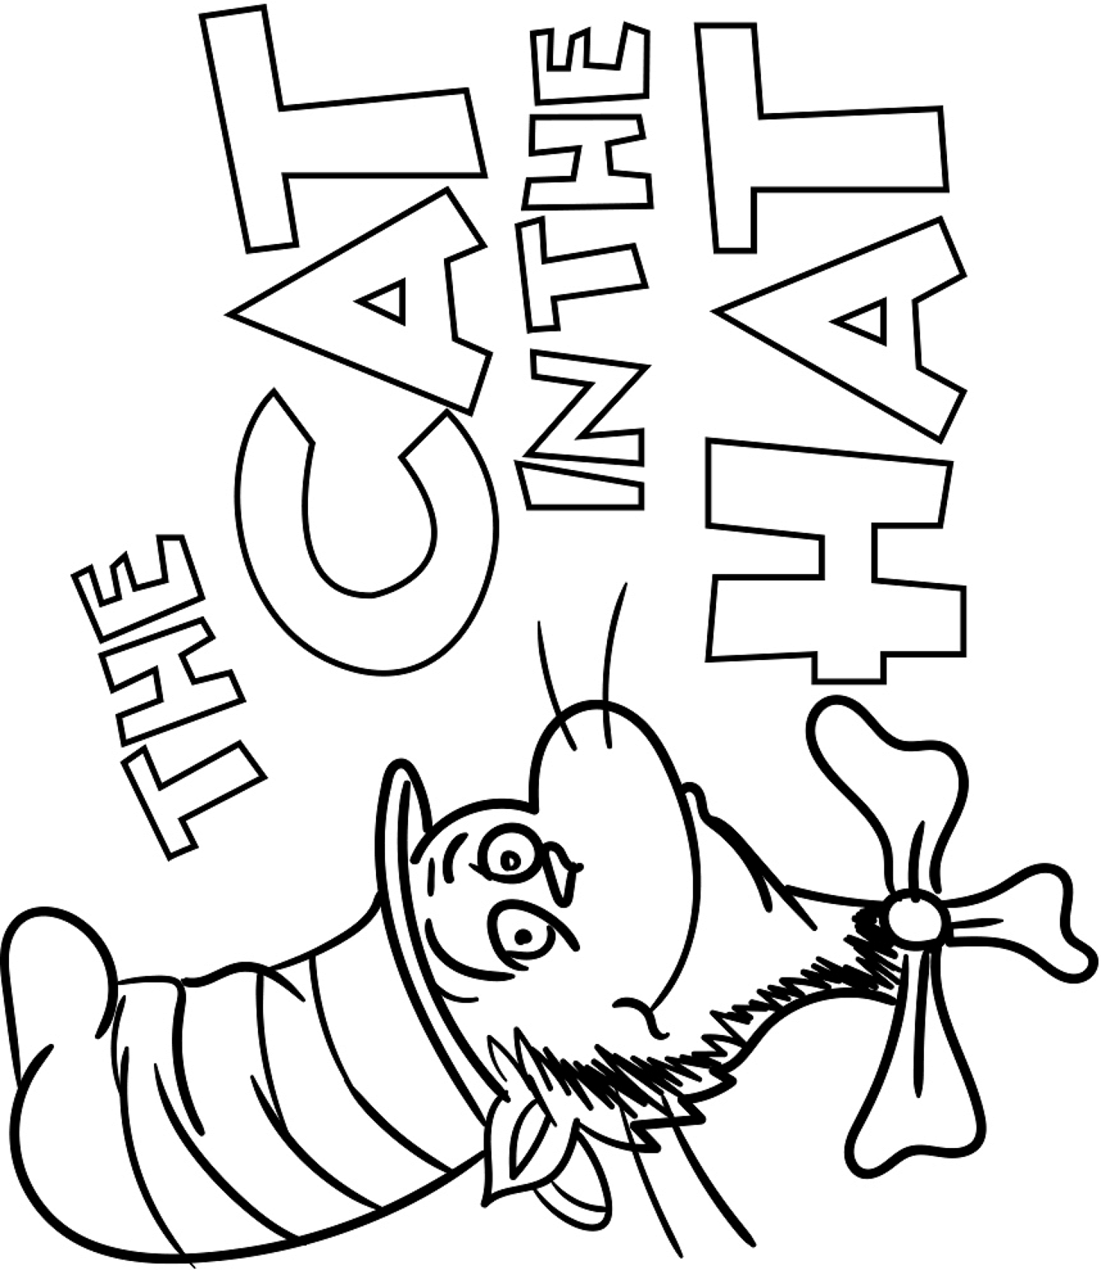 the-cat-in-the-hat-coloring-page-free-printable-coloring-pages-for-kids